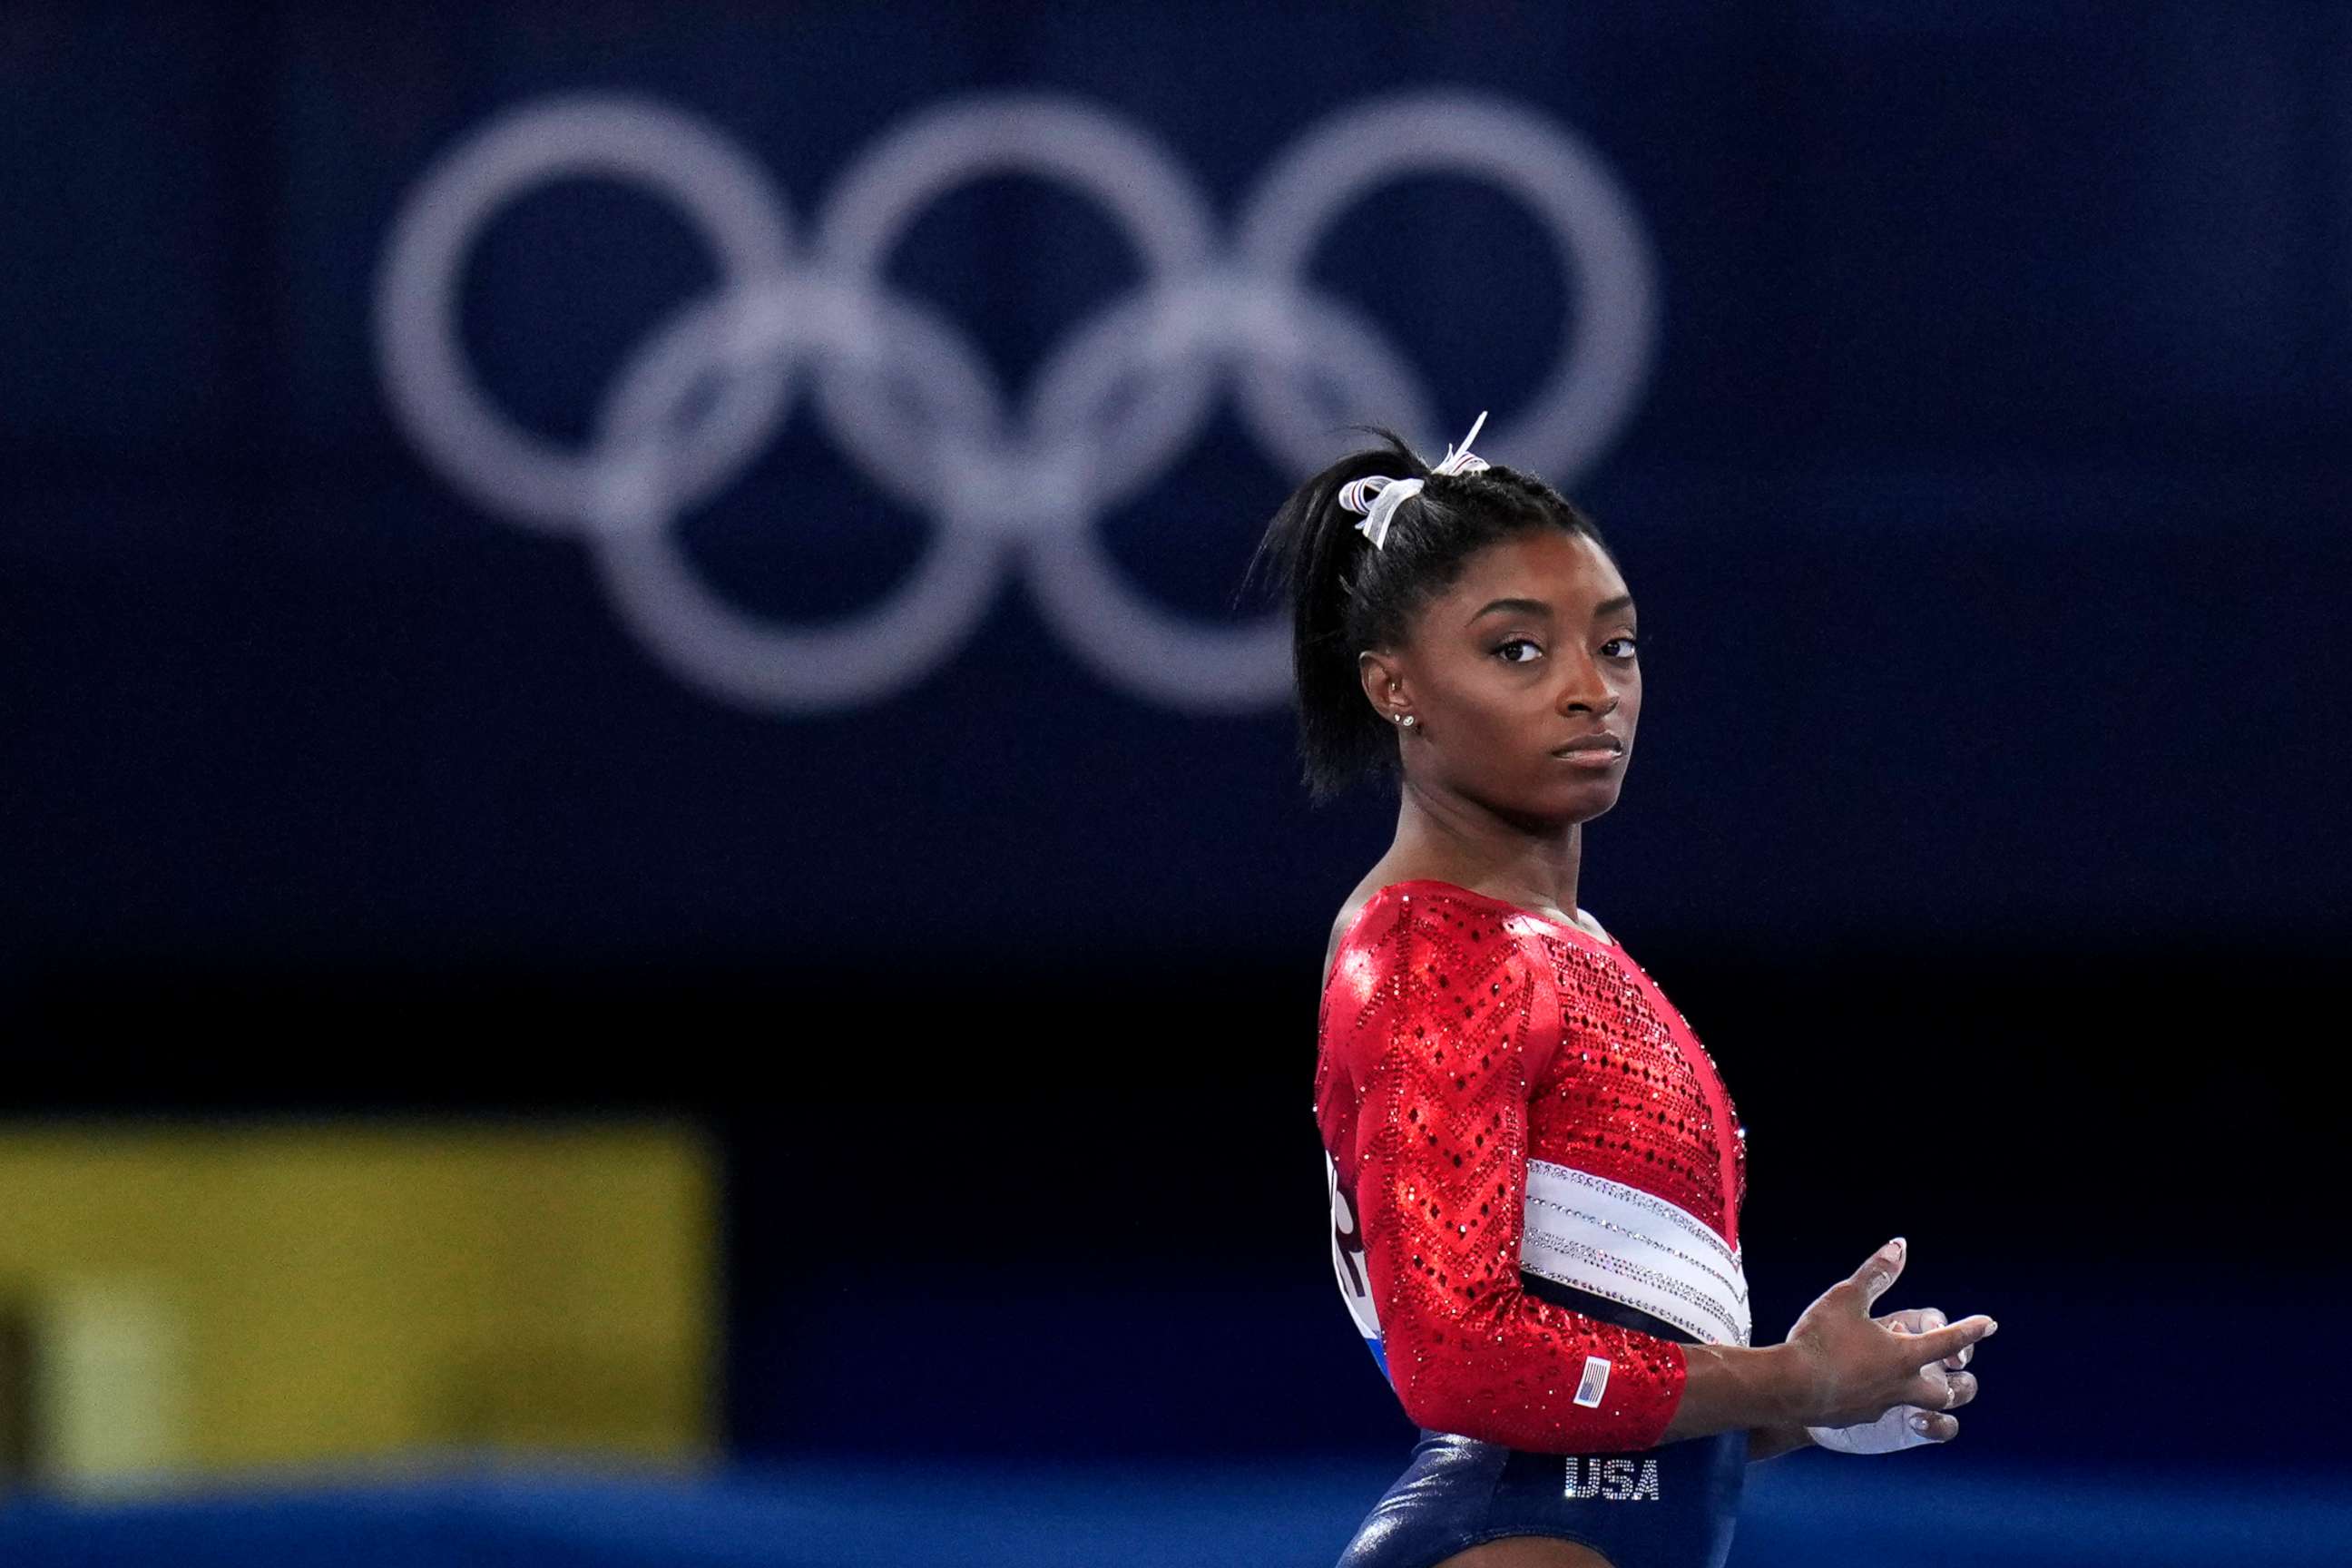 PHOTO: Simone Biles, of the U.S., waits to perform on the vault during the artistic gymnastics women's final at the 2020 Summer Olympics, July 27, 2021, in Tokyo.